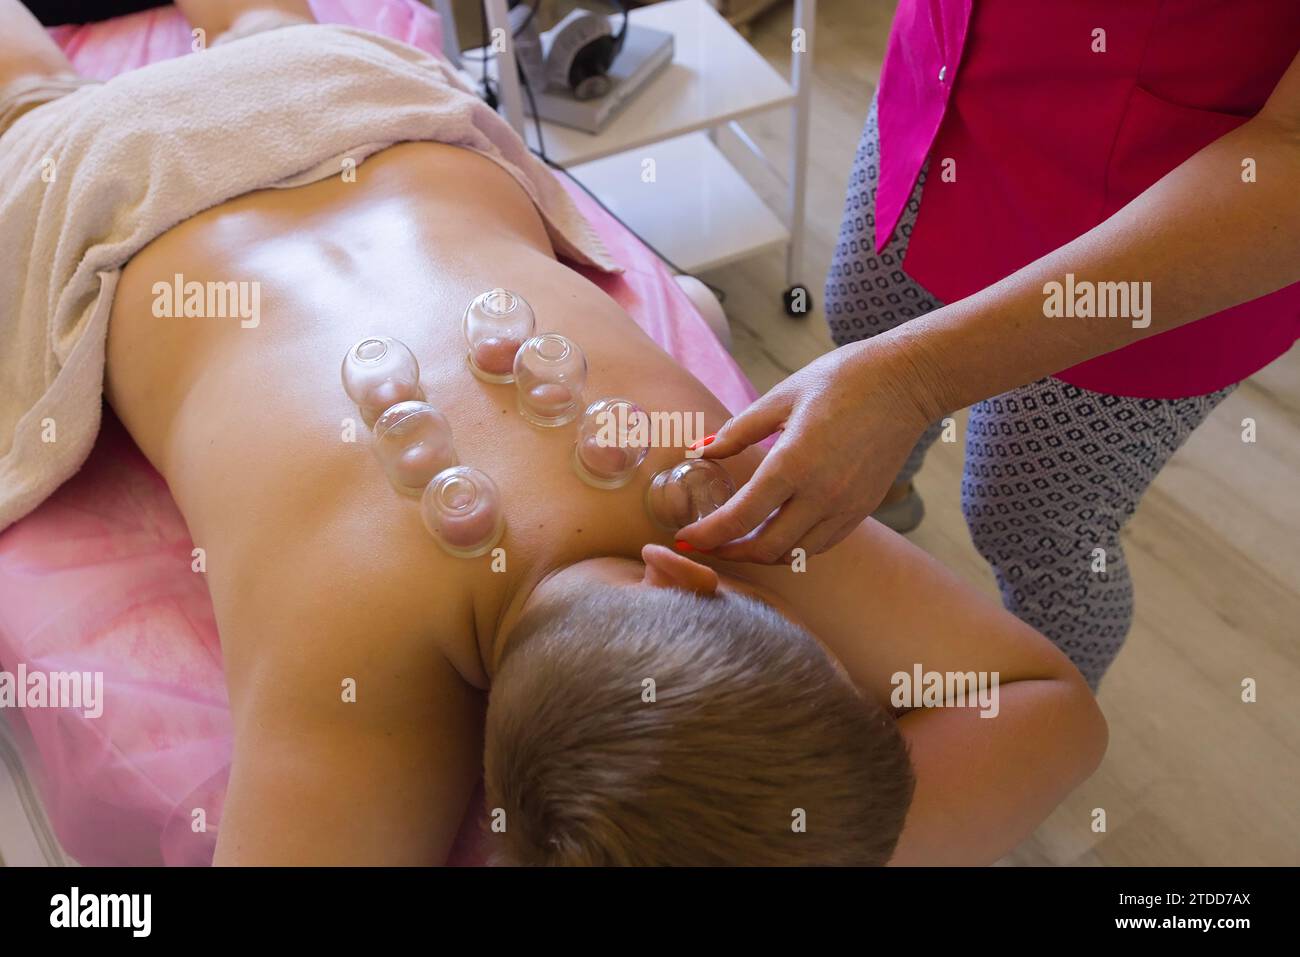 Traditional Chinese Cupping Therapy on the Back by Naturopath. Chinese Cup. Naturotherapy, massages, alternative medicine, natural medicine. Stock Photo